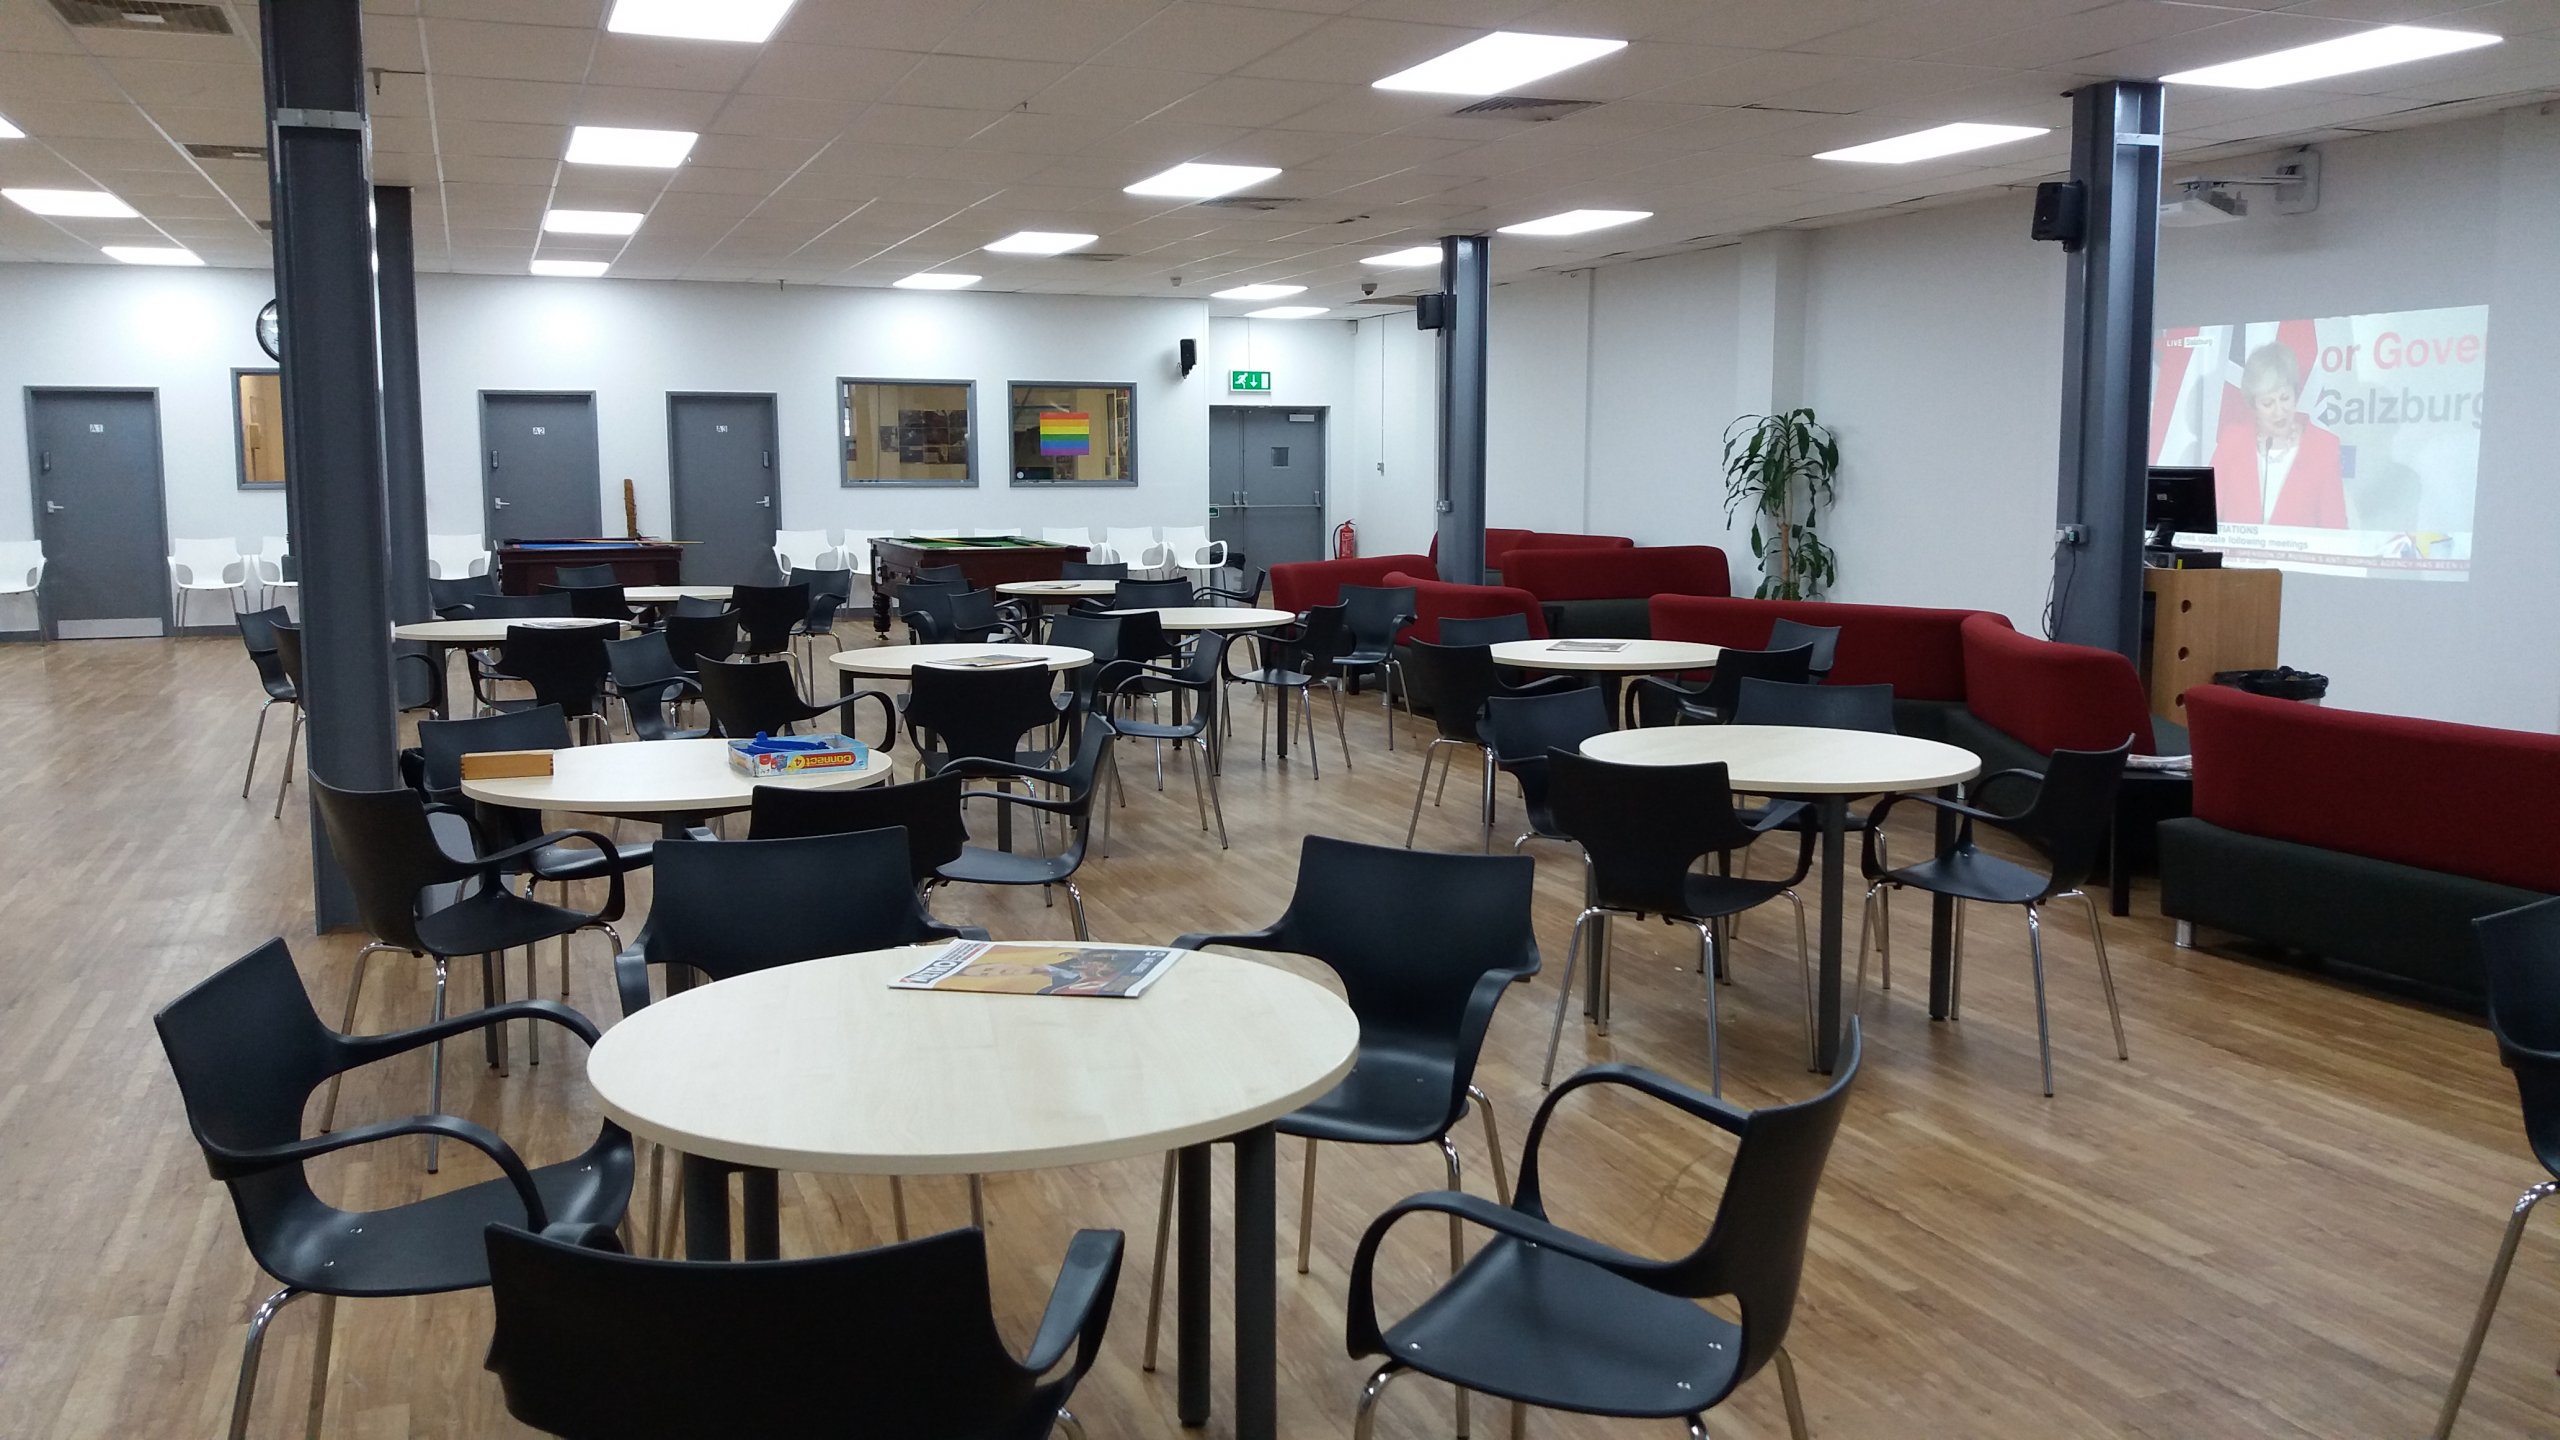 6th Form Common Room Seating